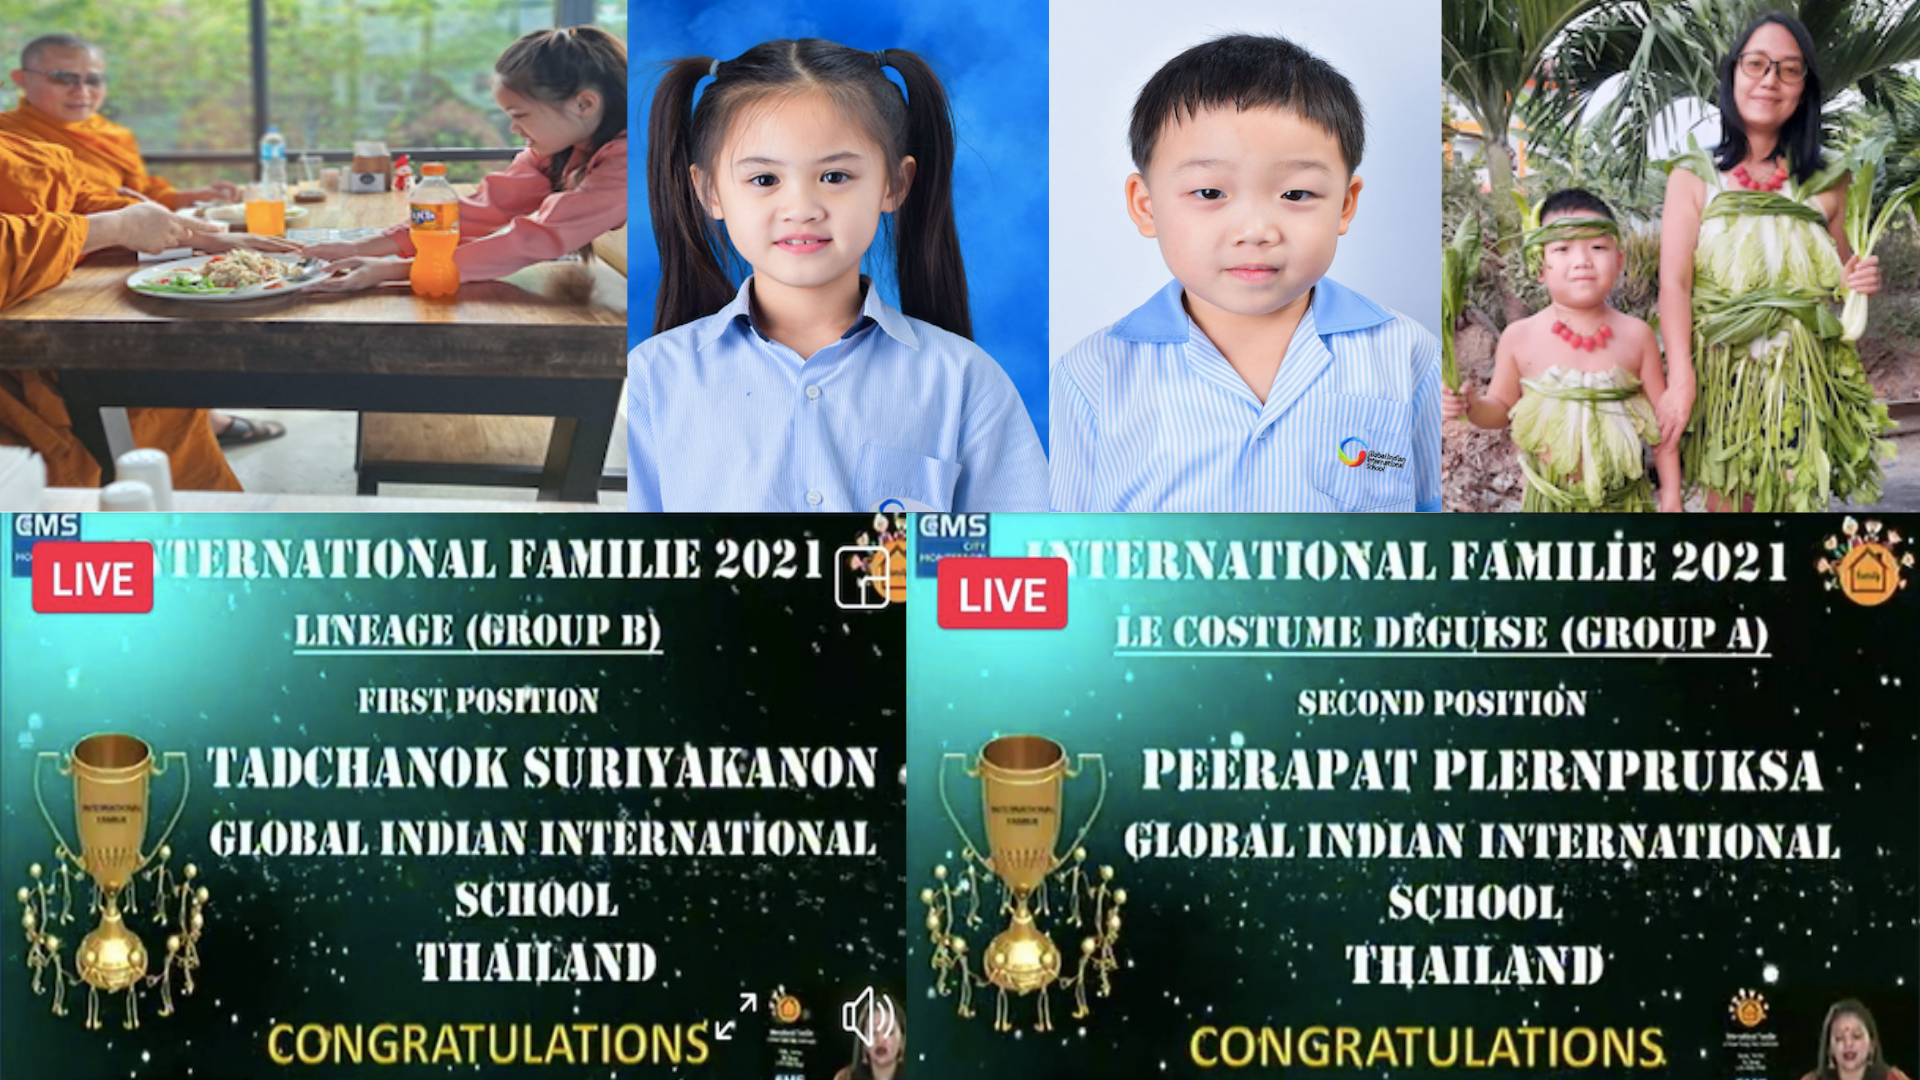 GIIS Thailand messiahs’ victory at The International Familie 2021